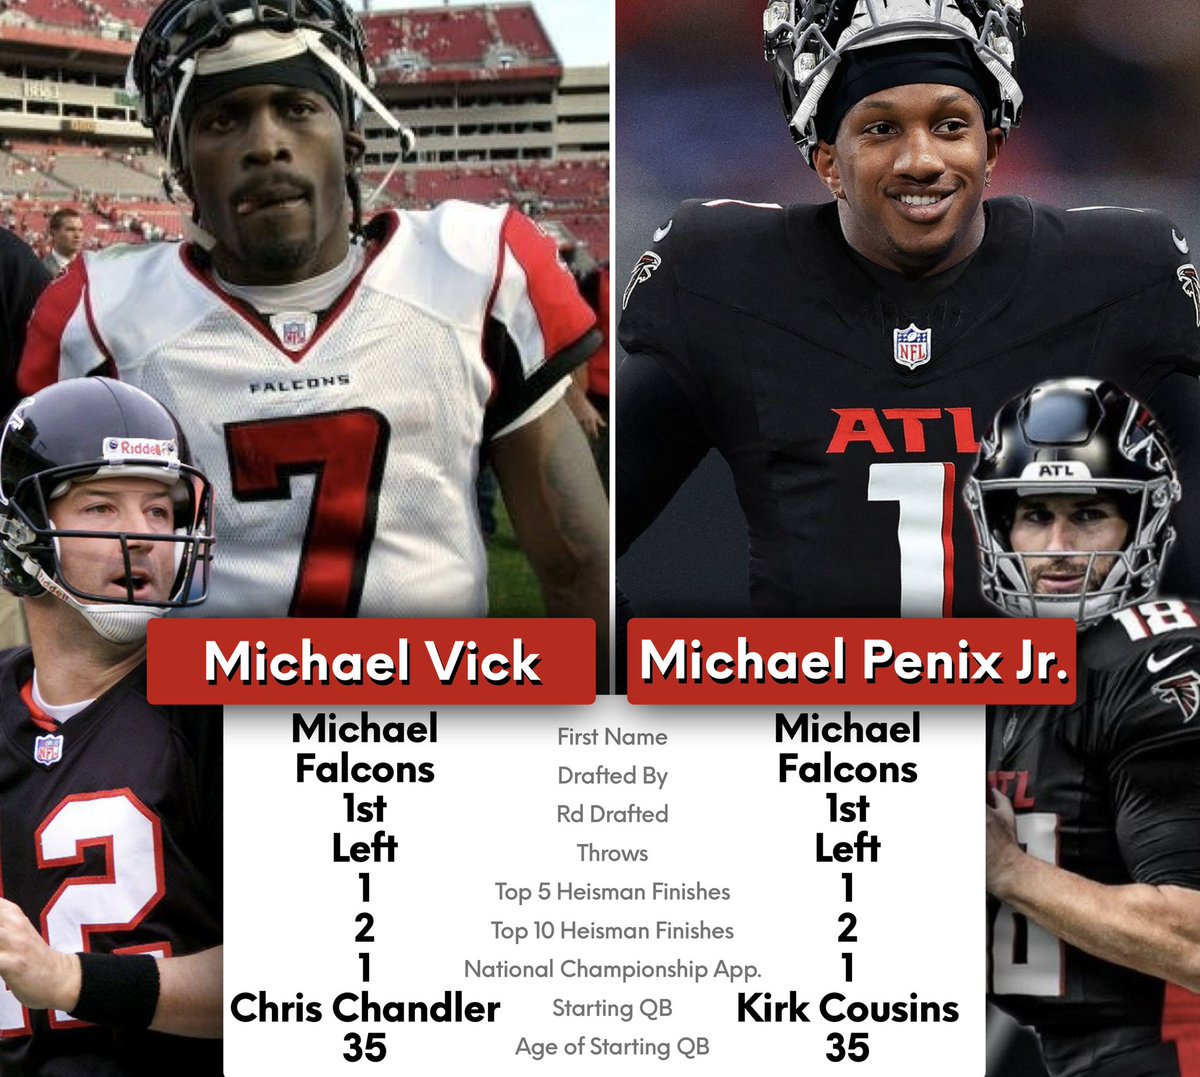 This the 2nd time the Falcons have drafted a left-handed QB named Michael in the 1st round while having a 35-year old veteran QB.